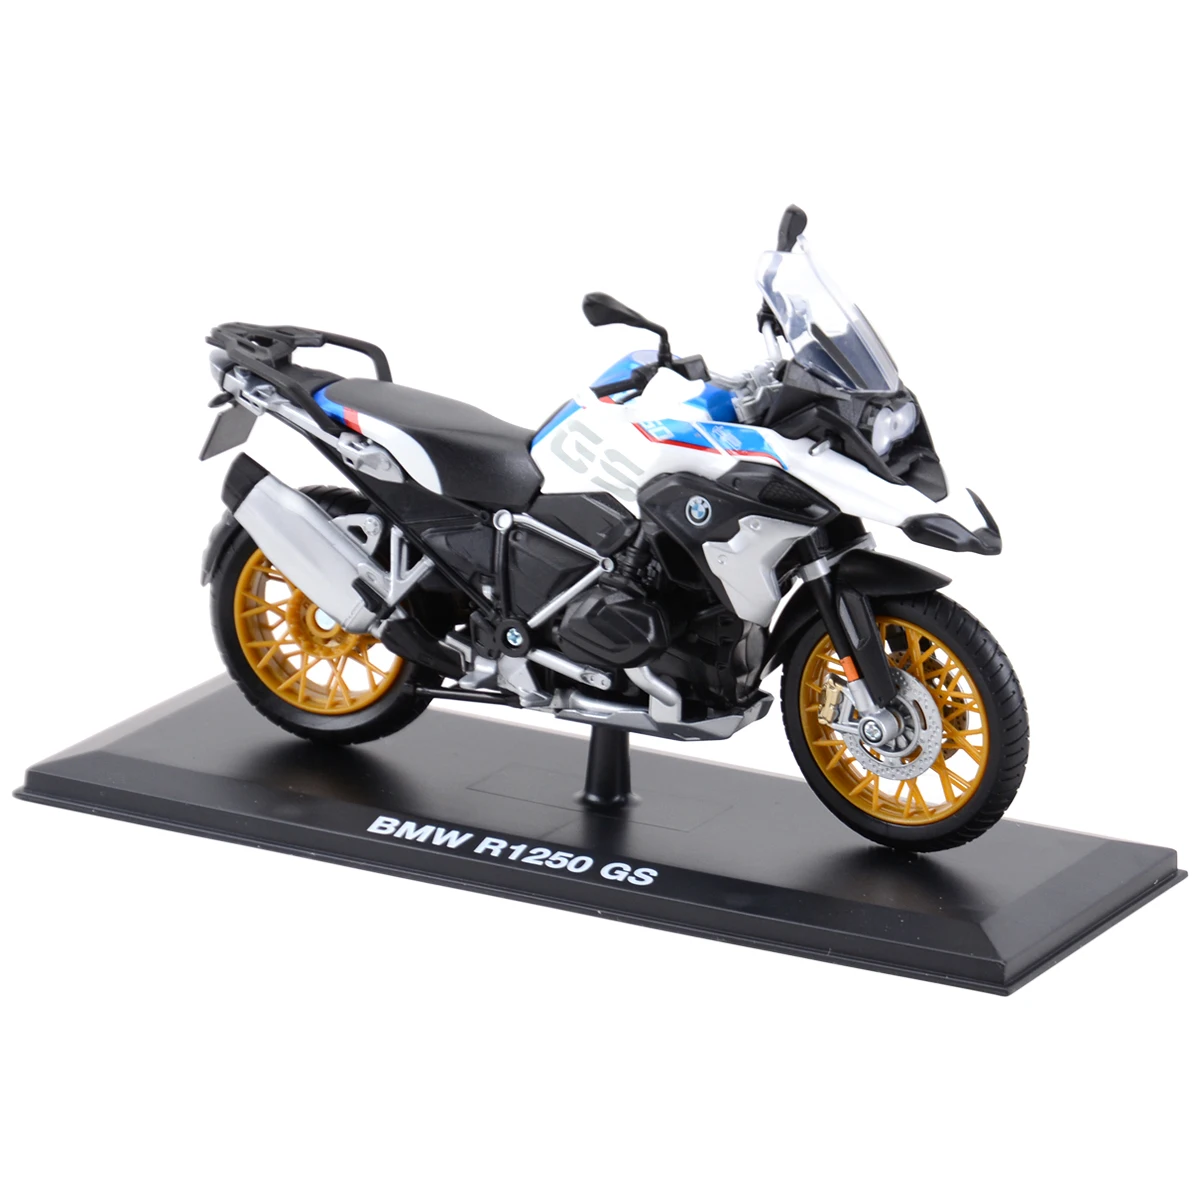 Maisto 1:12 BMW R1250GS With Stand Die Cast Vehicles Collectible Hobbies Motorcycle Model Toys